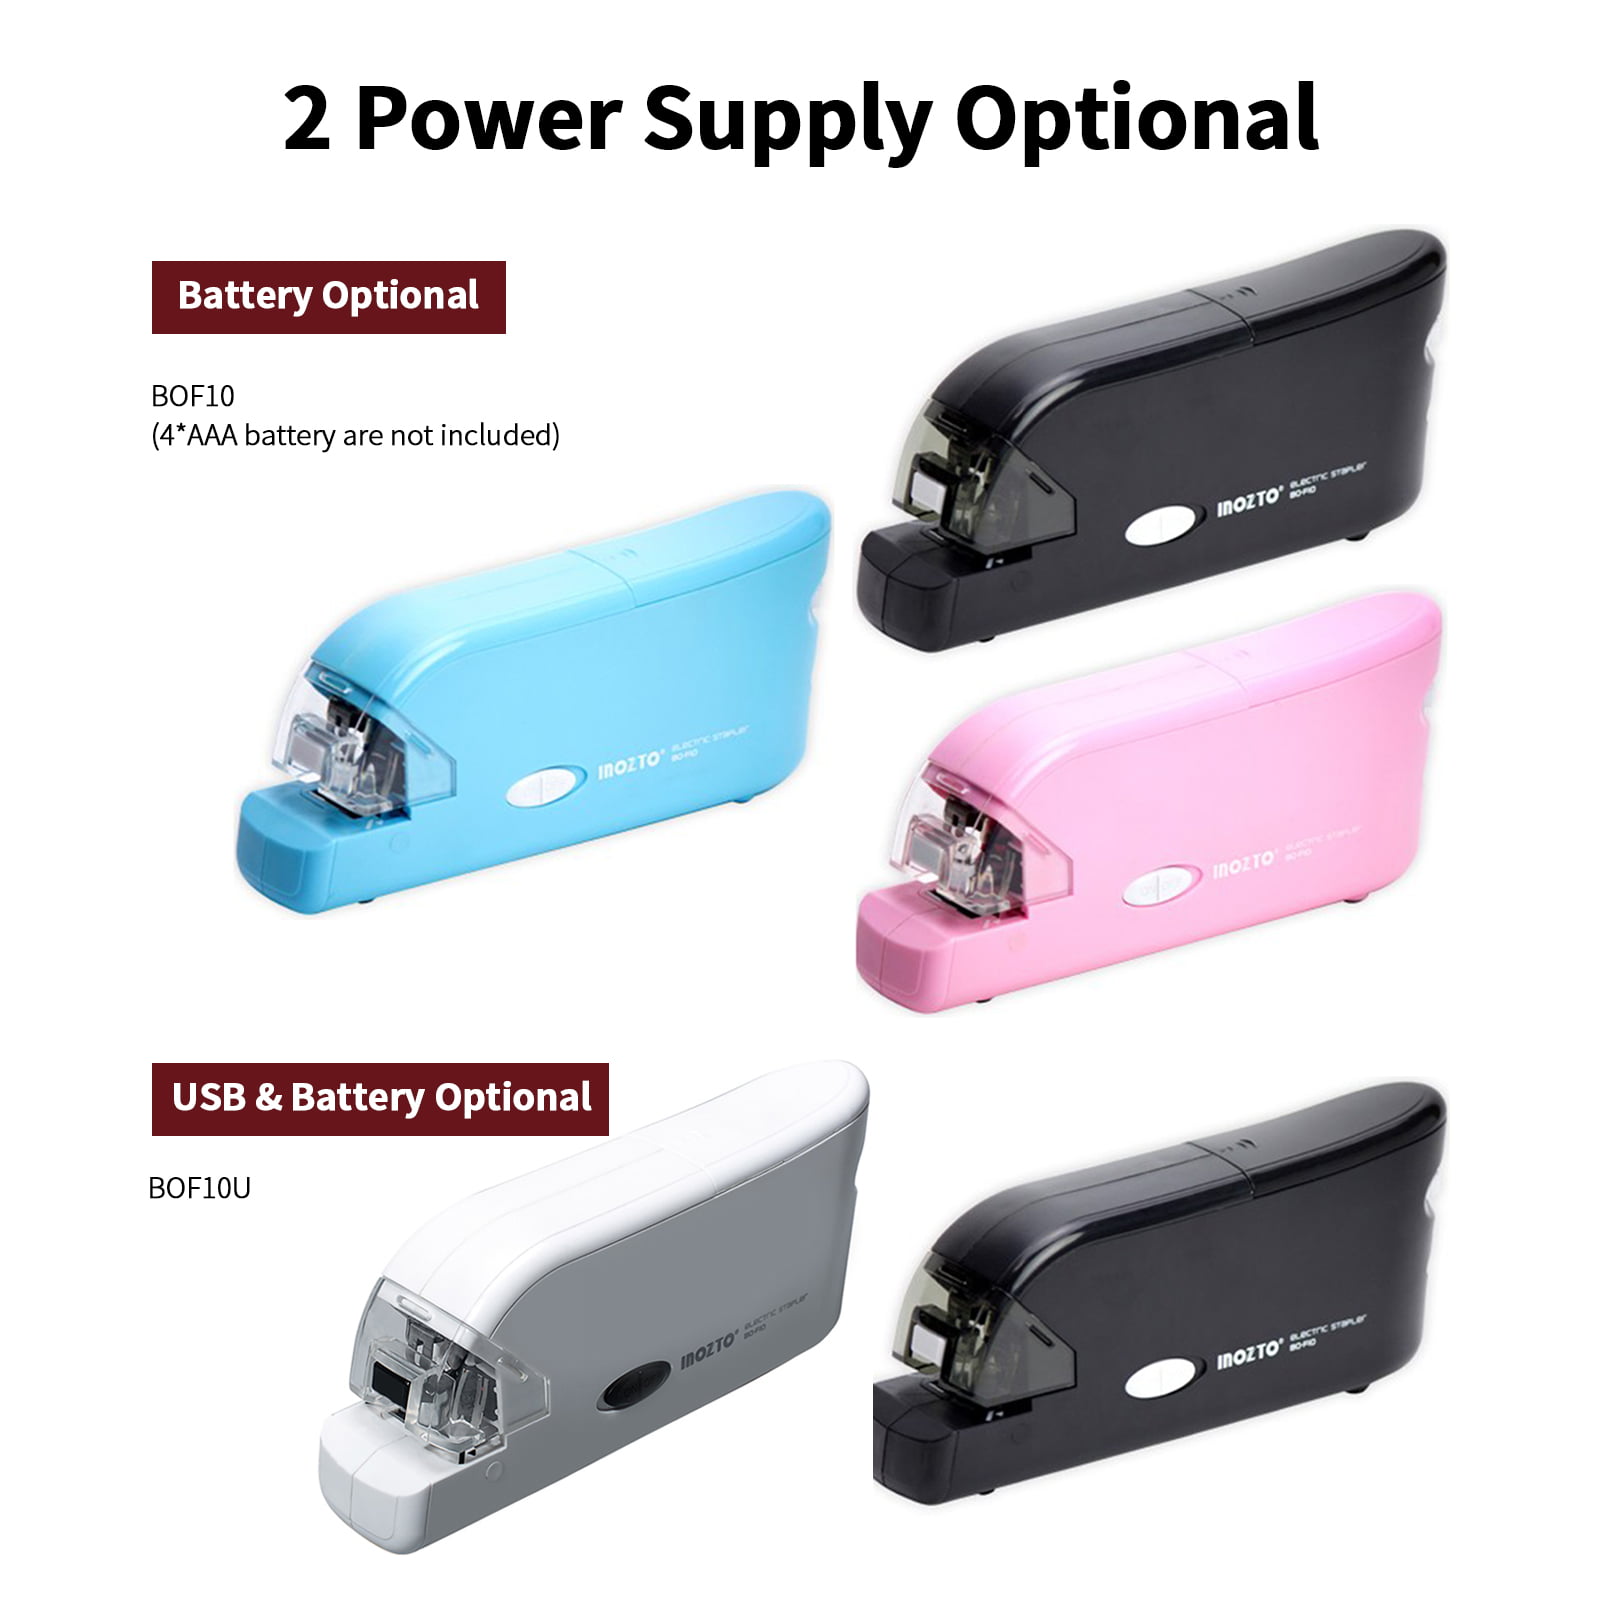 Staright Automatic Electric Stapler 20 Sheet Capacity with Extra Staple Storage Warehouse Non-Slip Desktop Office Stapler Less Effort for Home Office School Supplies Battery Power Supply